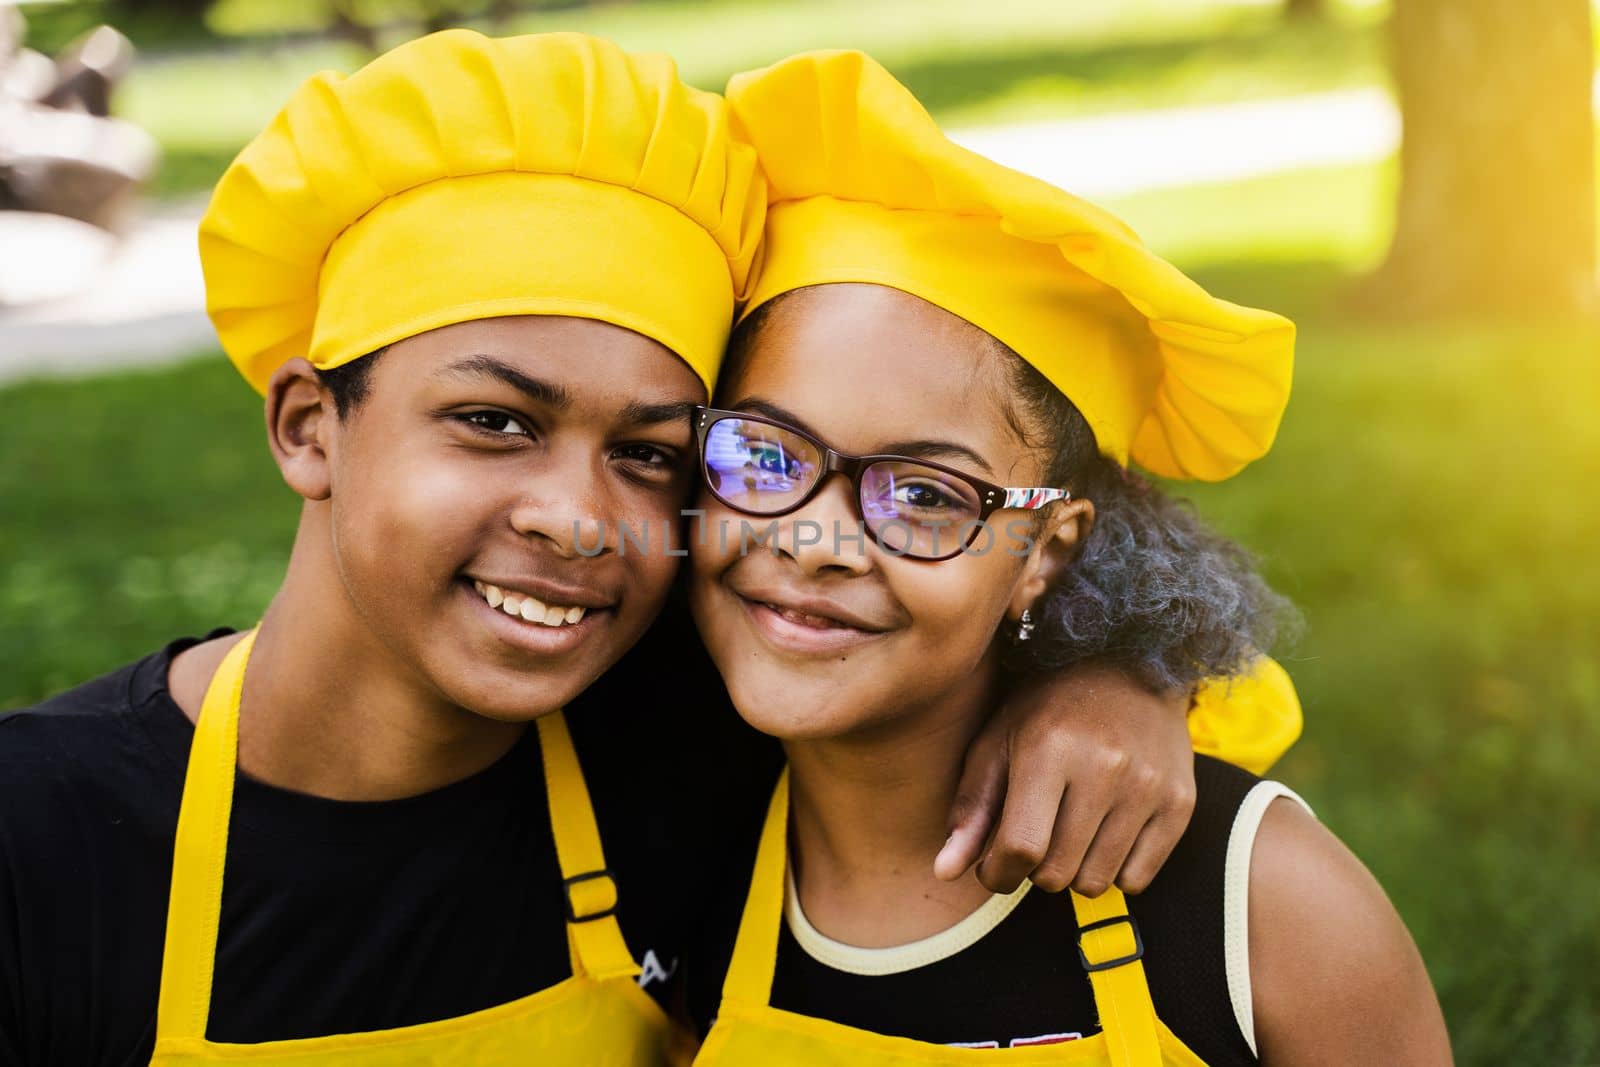 African children cooks in chefs hat and yellow uniforms smiling close-up portrait . African teenager and black girl have fun and cook food. by Rabizo